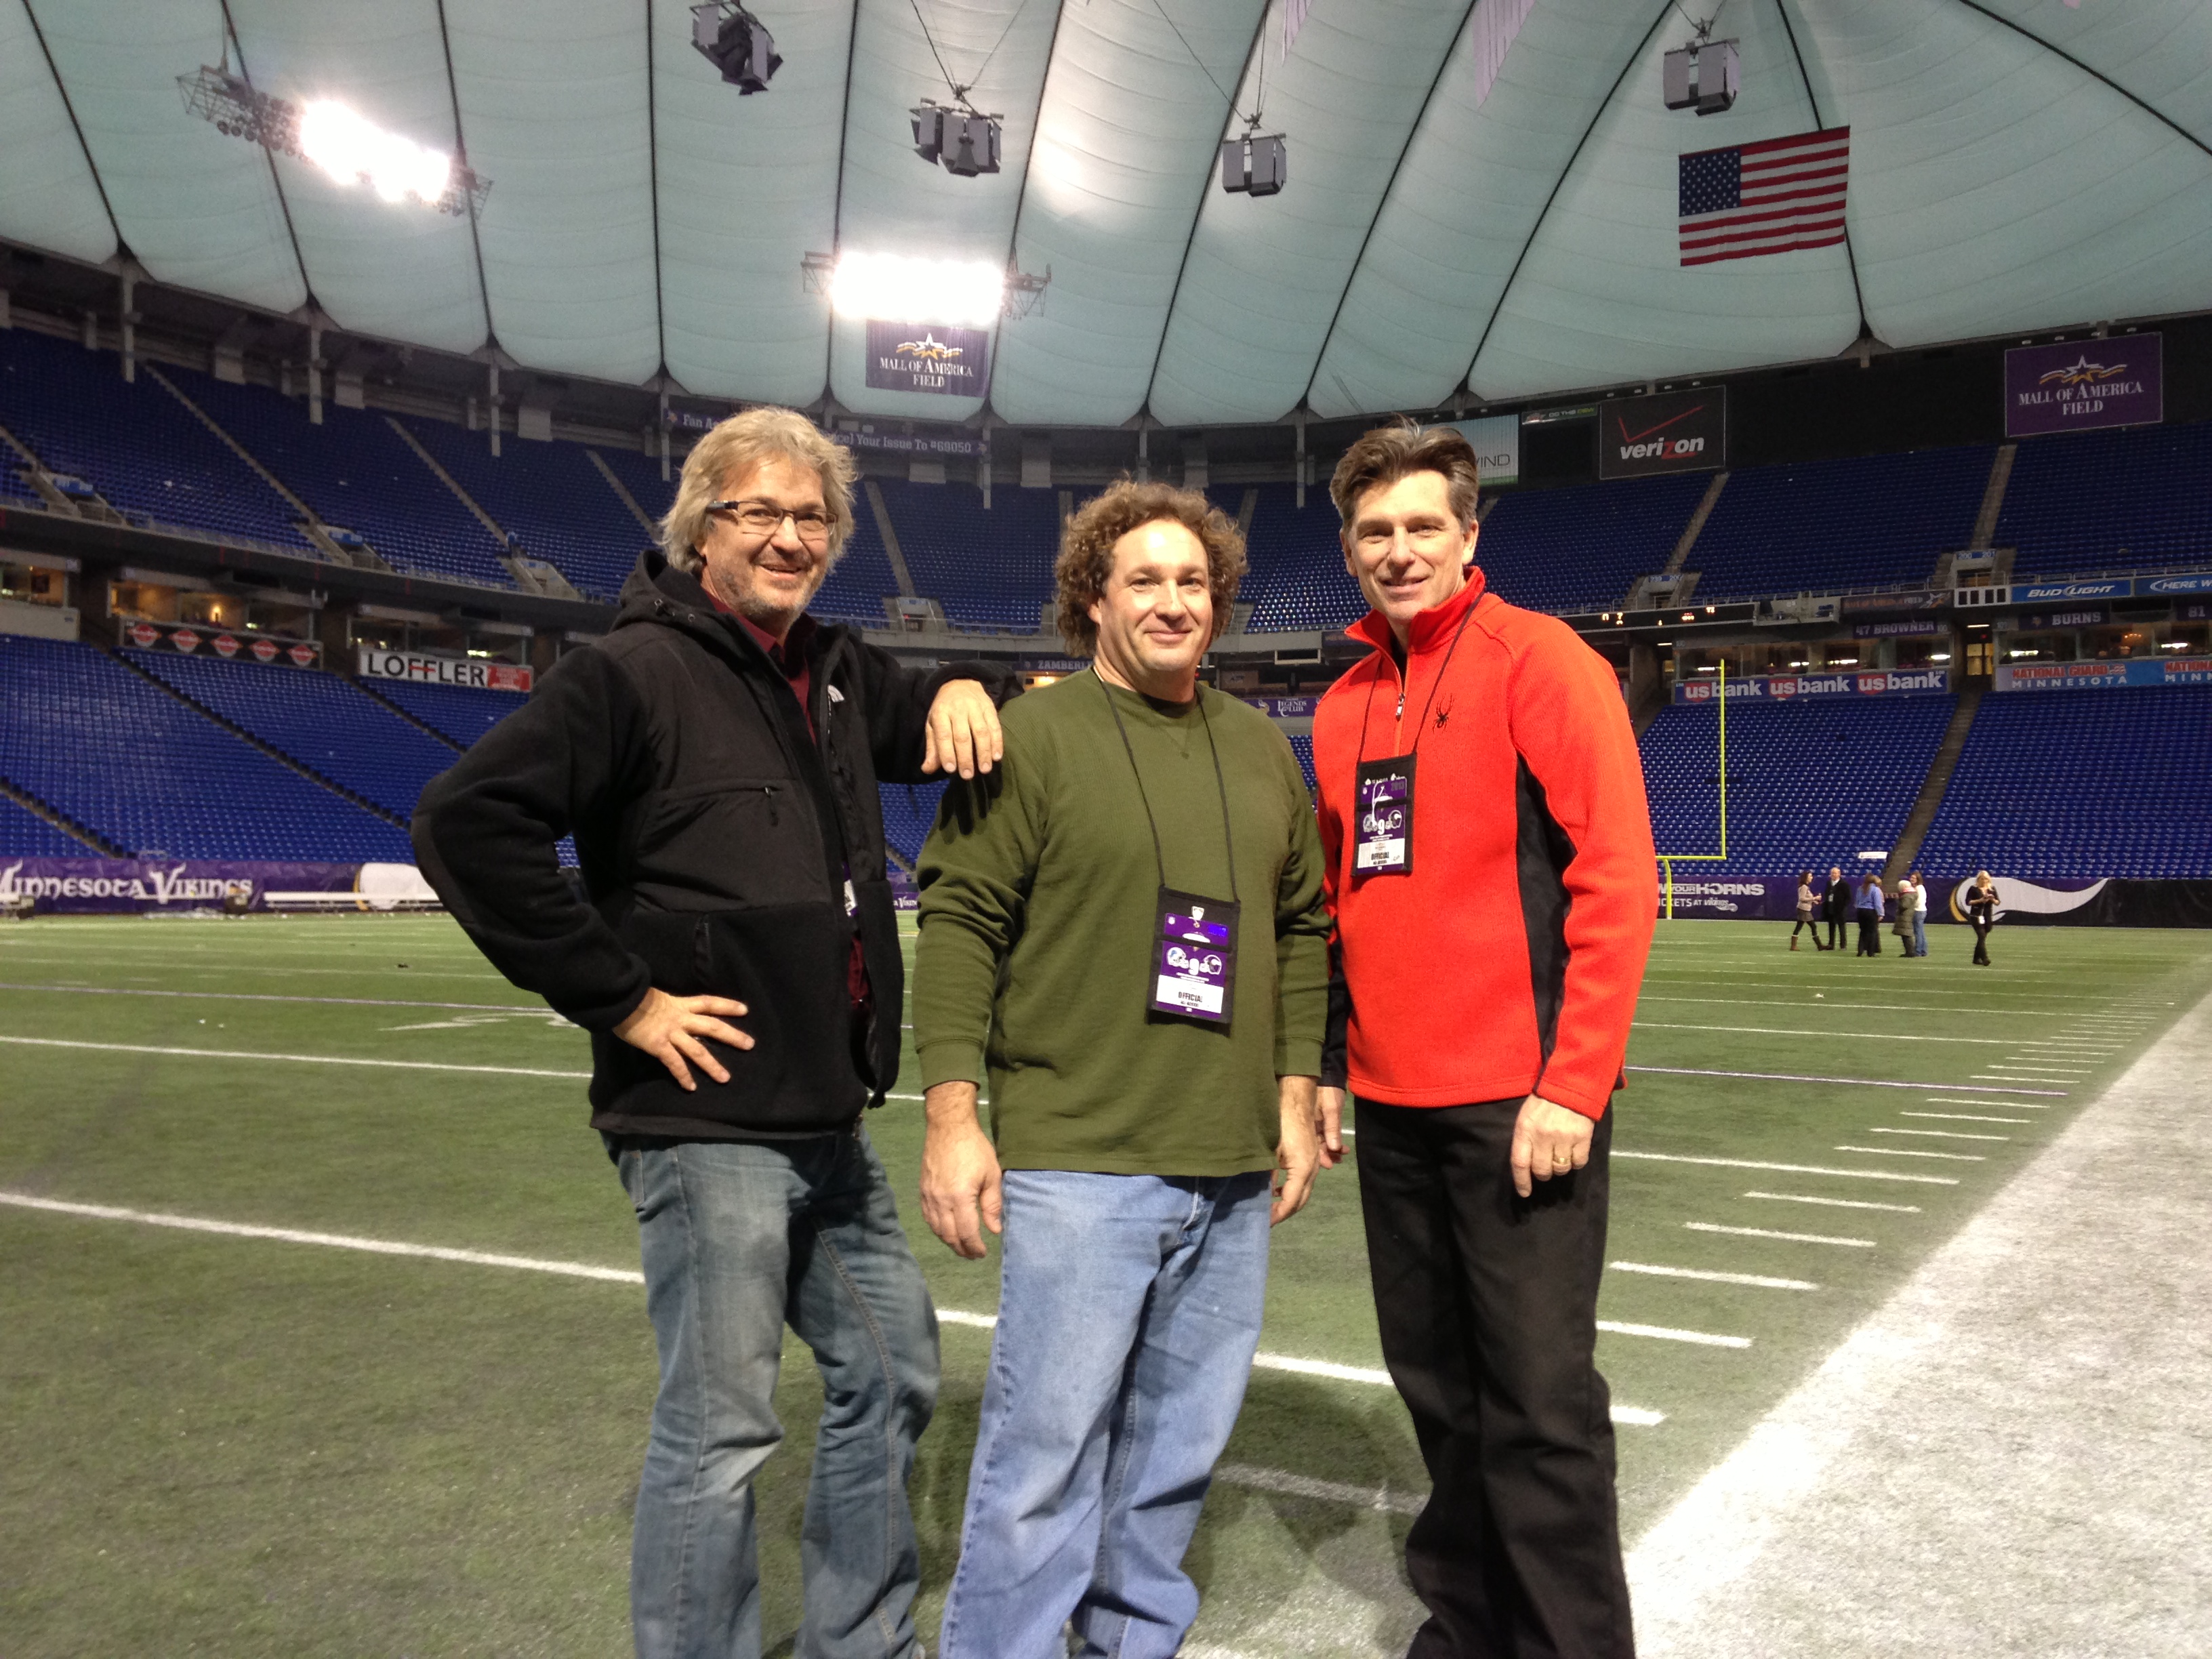 Last day at the Metrodome in Minneapolis